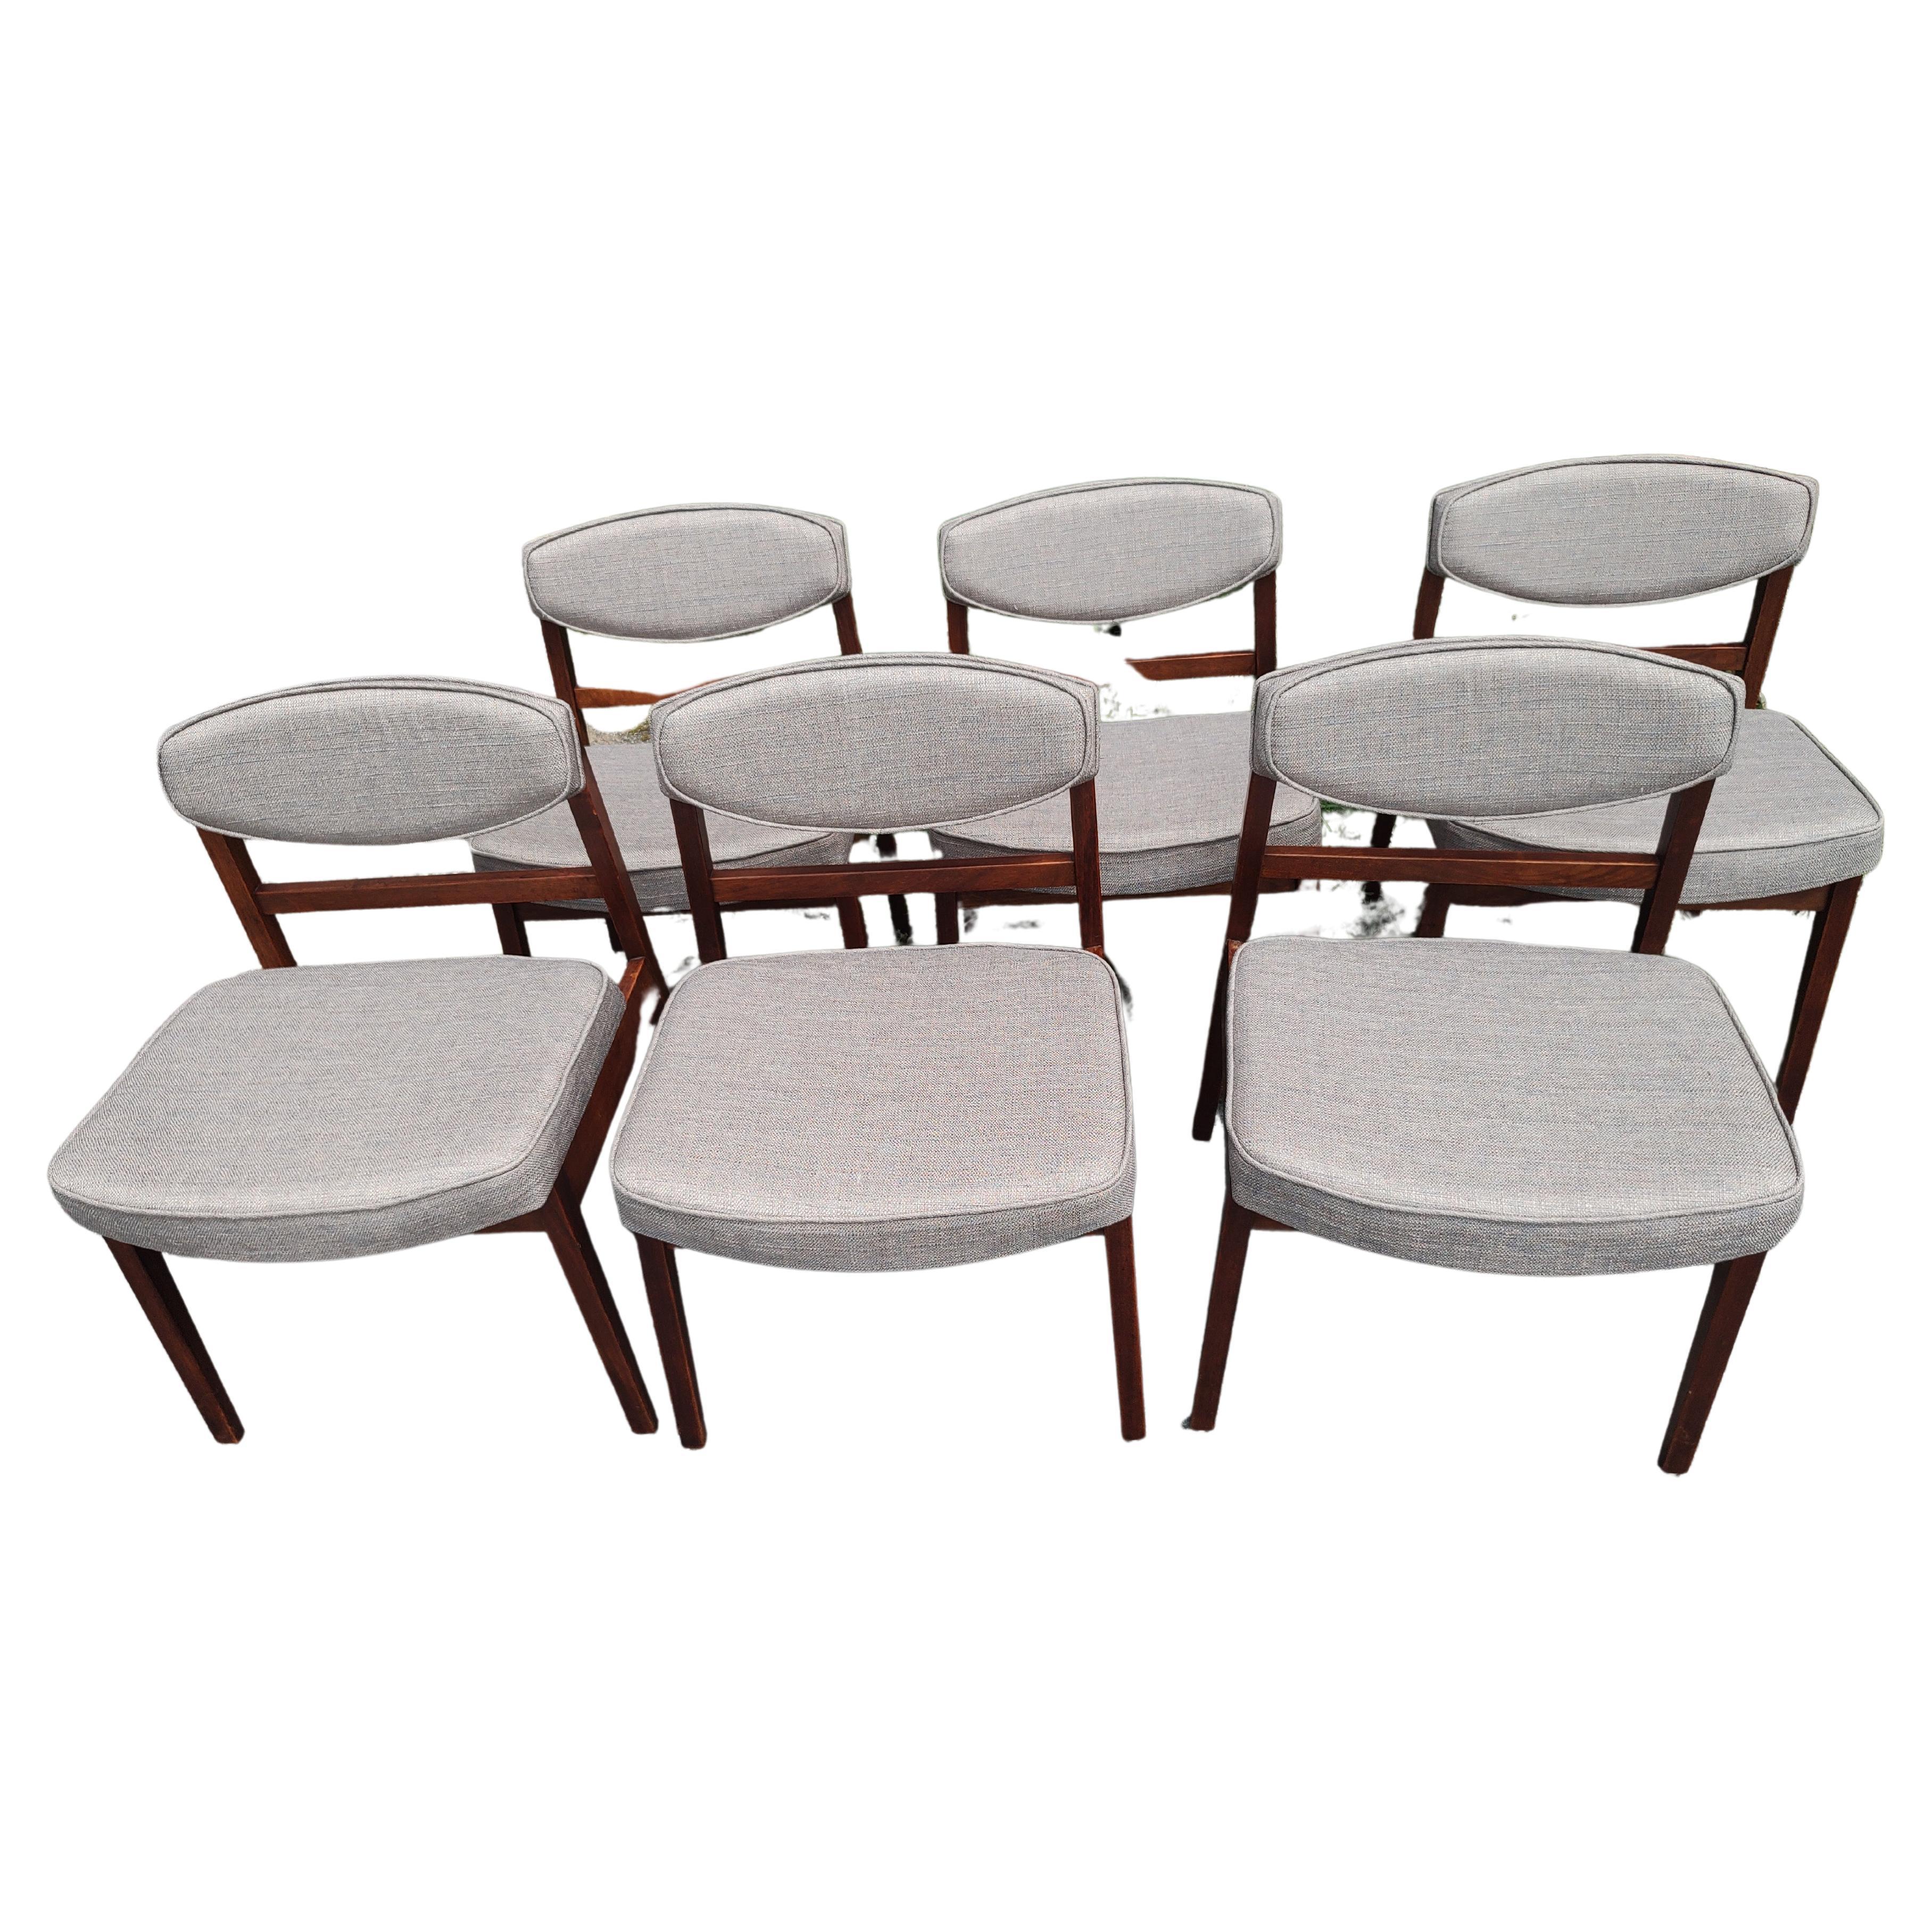 Set of 8 Mid Century Modern Teak Dining Chairs by George Nelson - Herman Miller For Sale 5